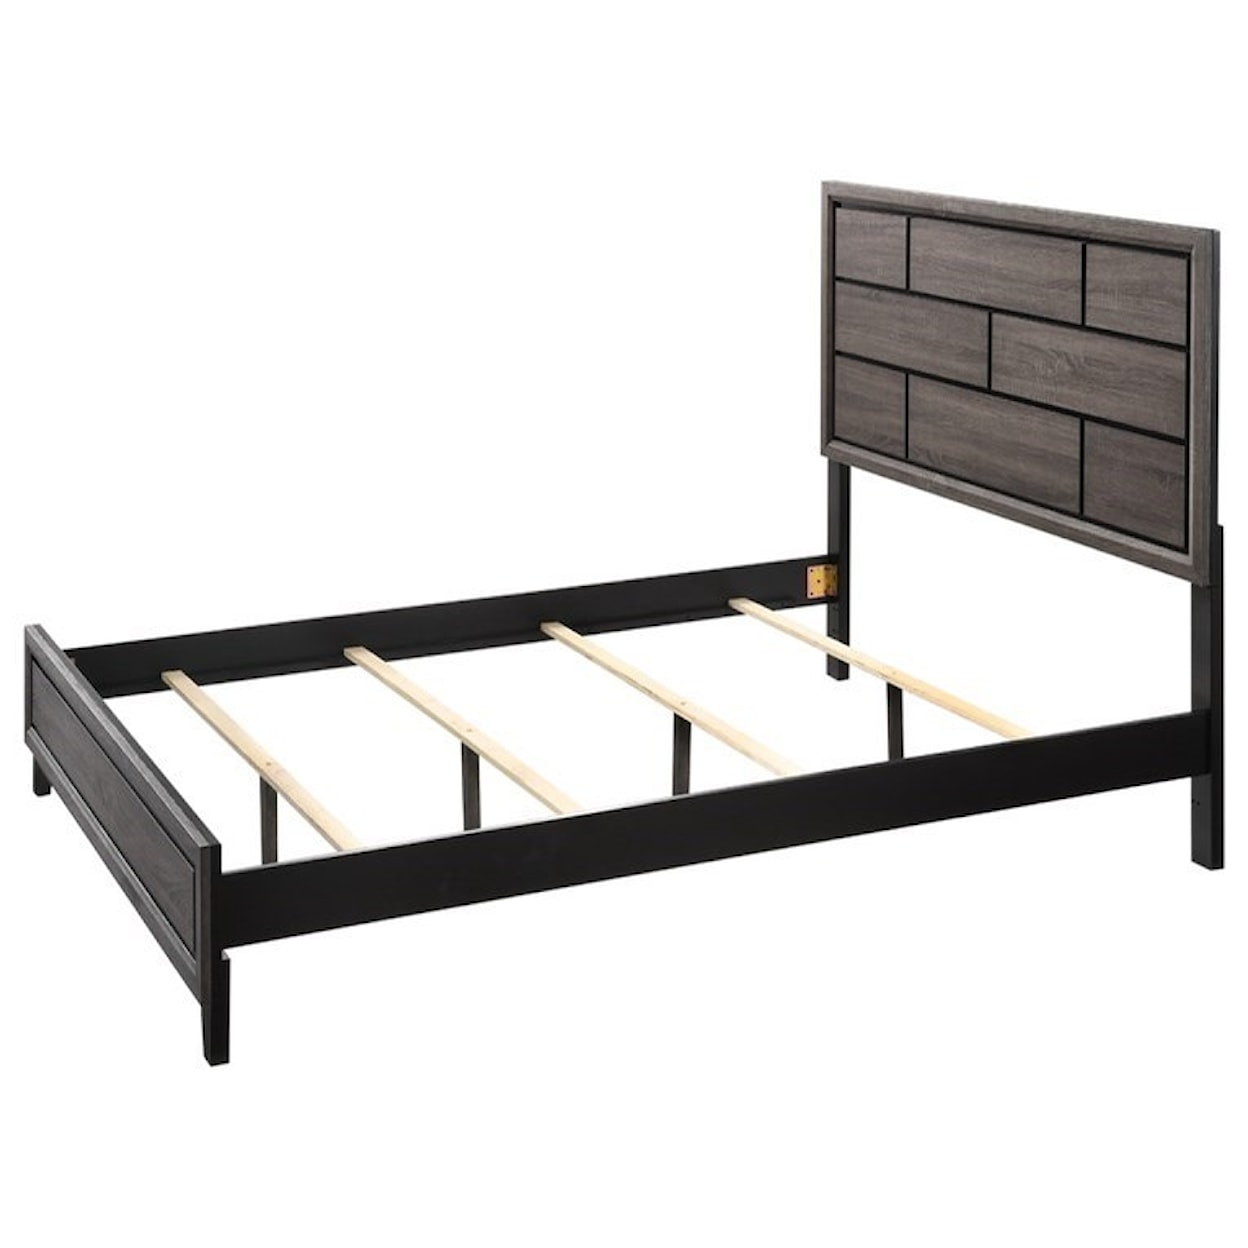 CM Akerson Queen Bed